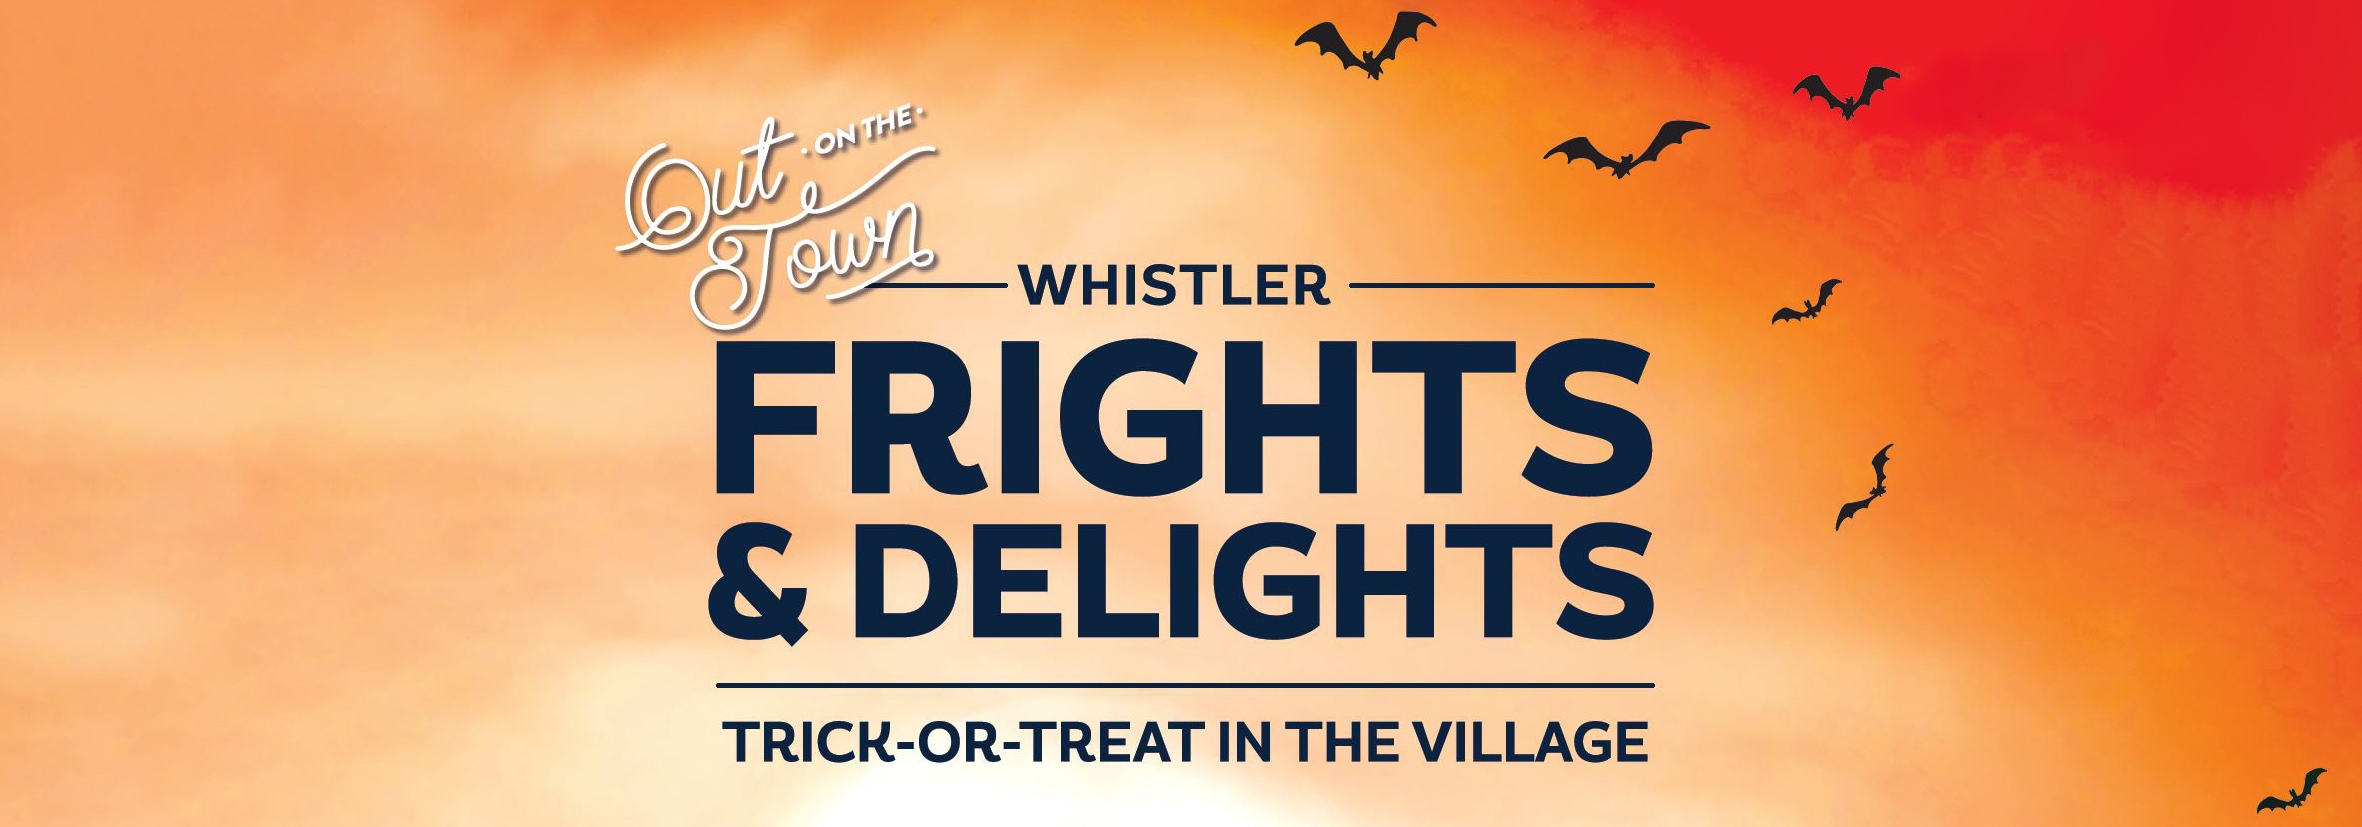 Whistler Frights & Delights